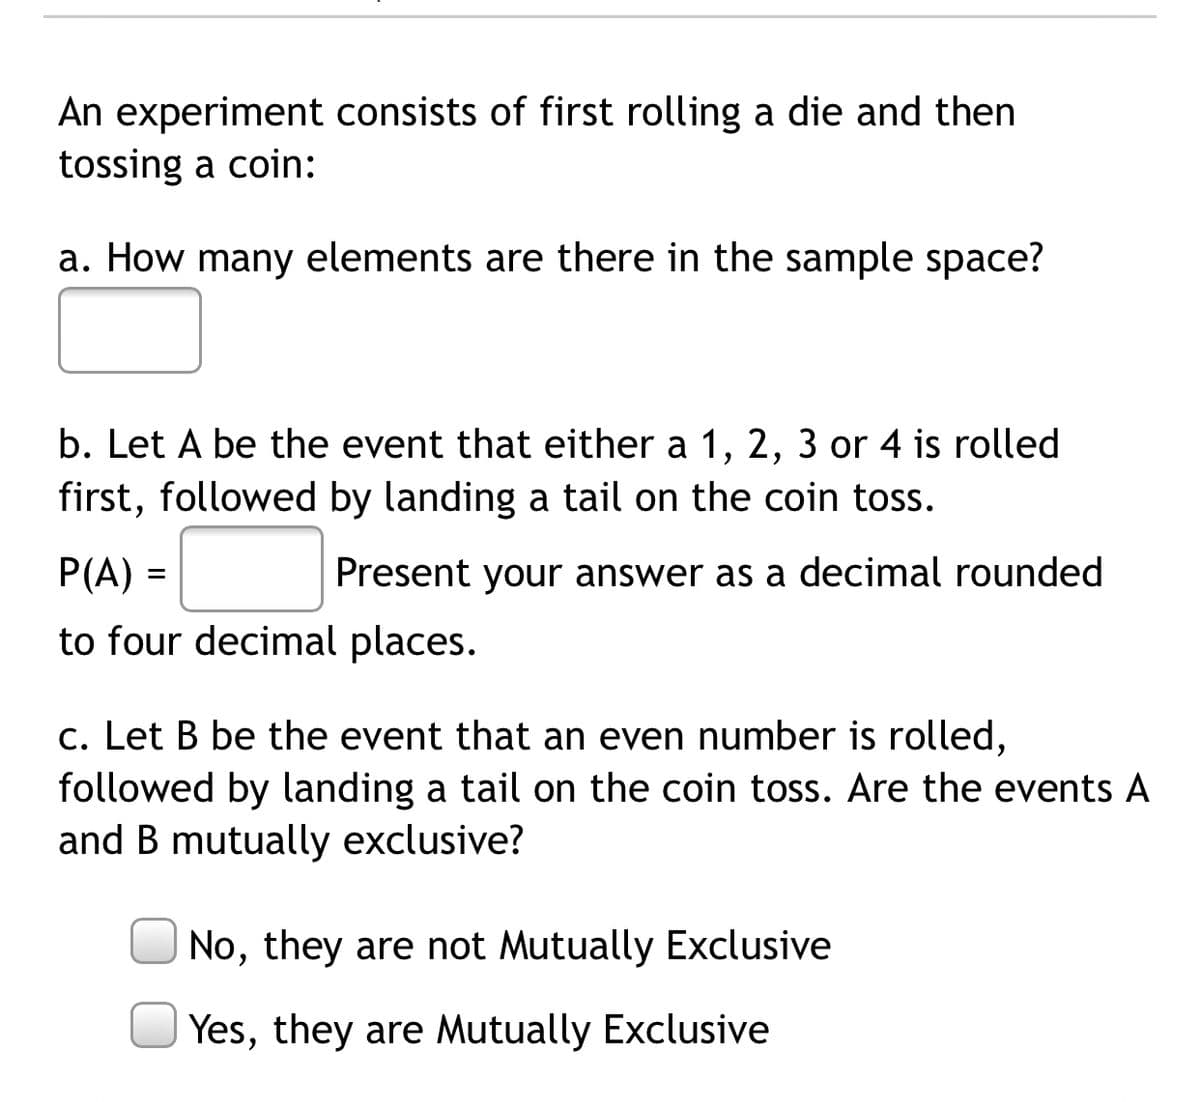 An experiment consists of first rolling a die and then
tossing a coin:
a. How many elements are there in the sample space?
b. Let A be the event that either a 1, 2, 3 or 4 is rolled
first, followed by landing a tail on the coin toss.
P(A) =
Present your answer as a decimal rounded
to four decimal places.
c. Let B be the event that an even number is rolled,
followed by landing a tail on the coin toss. Are the events A
and B mutually exclusive?
No, they are not Mutually Exclusive
Yes, they are Mutually Exclusive
